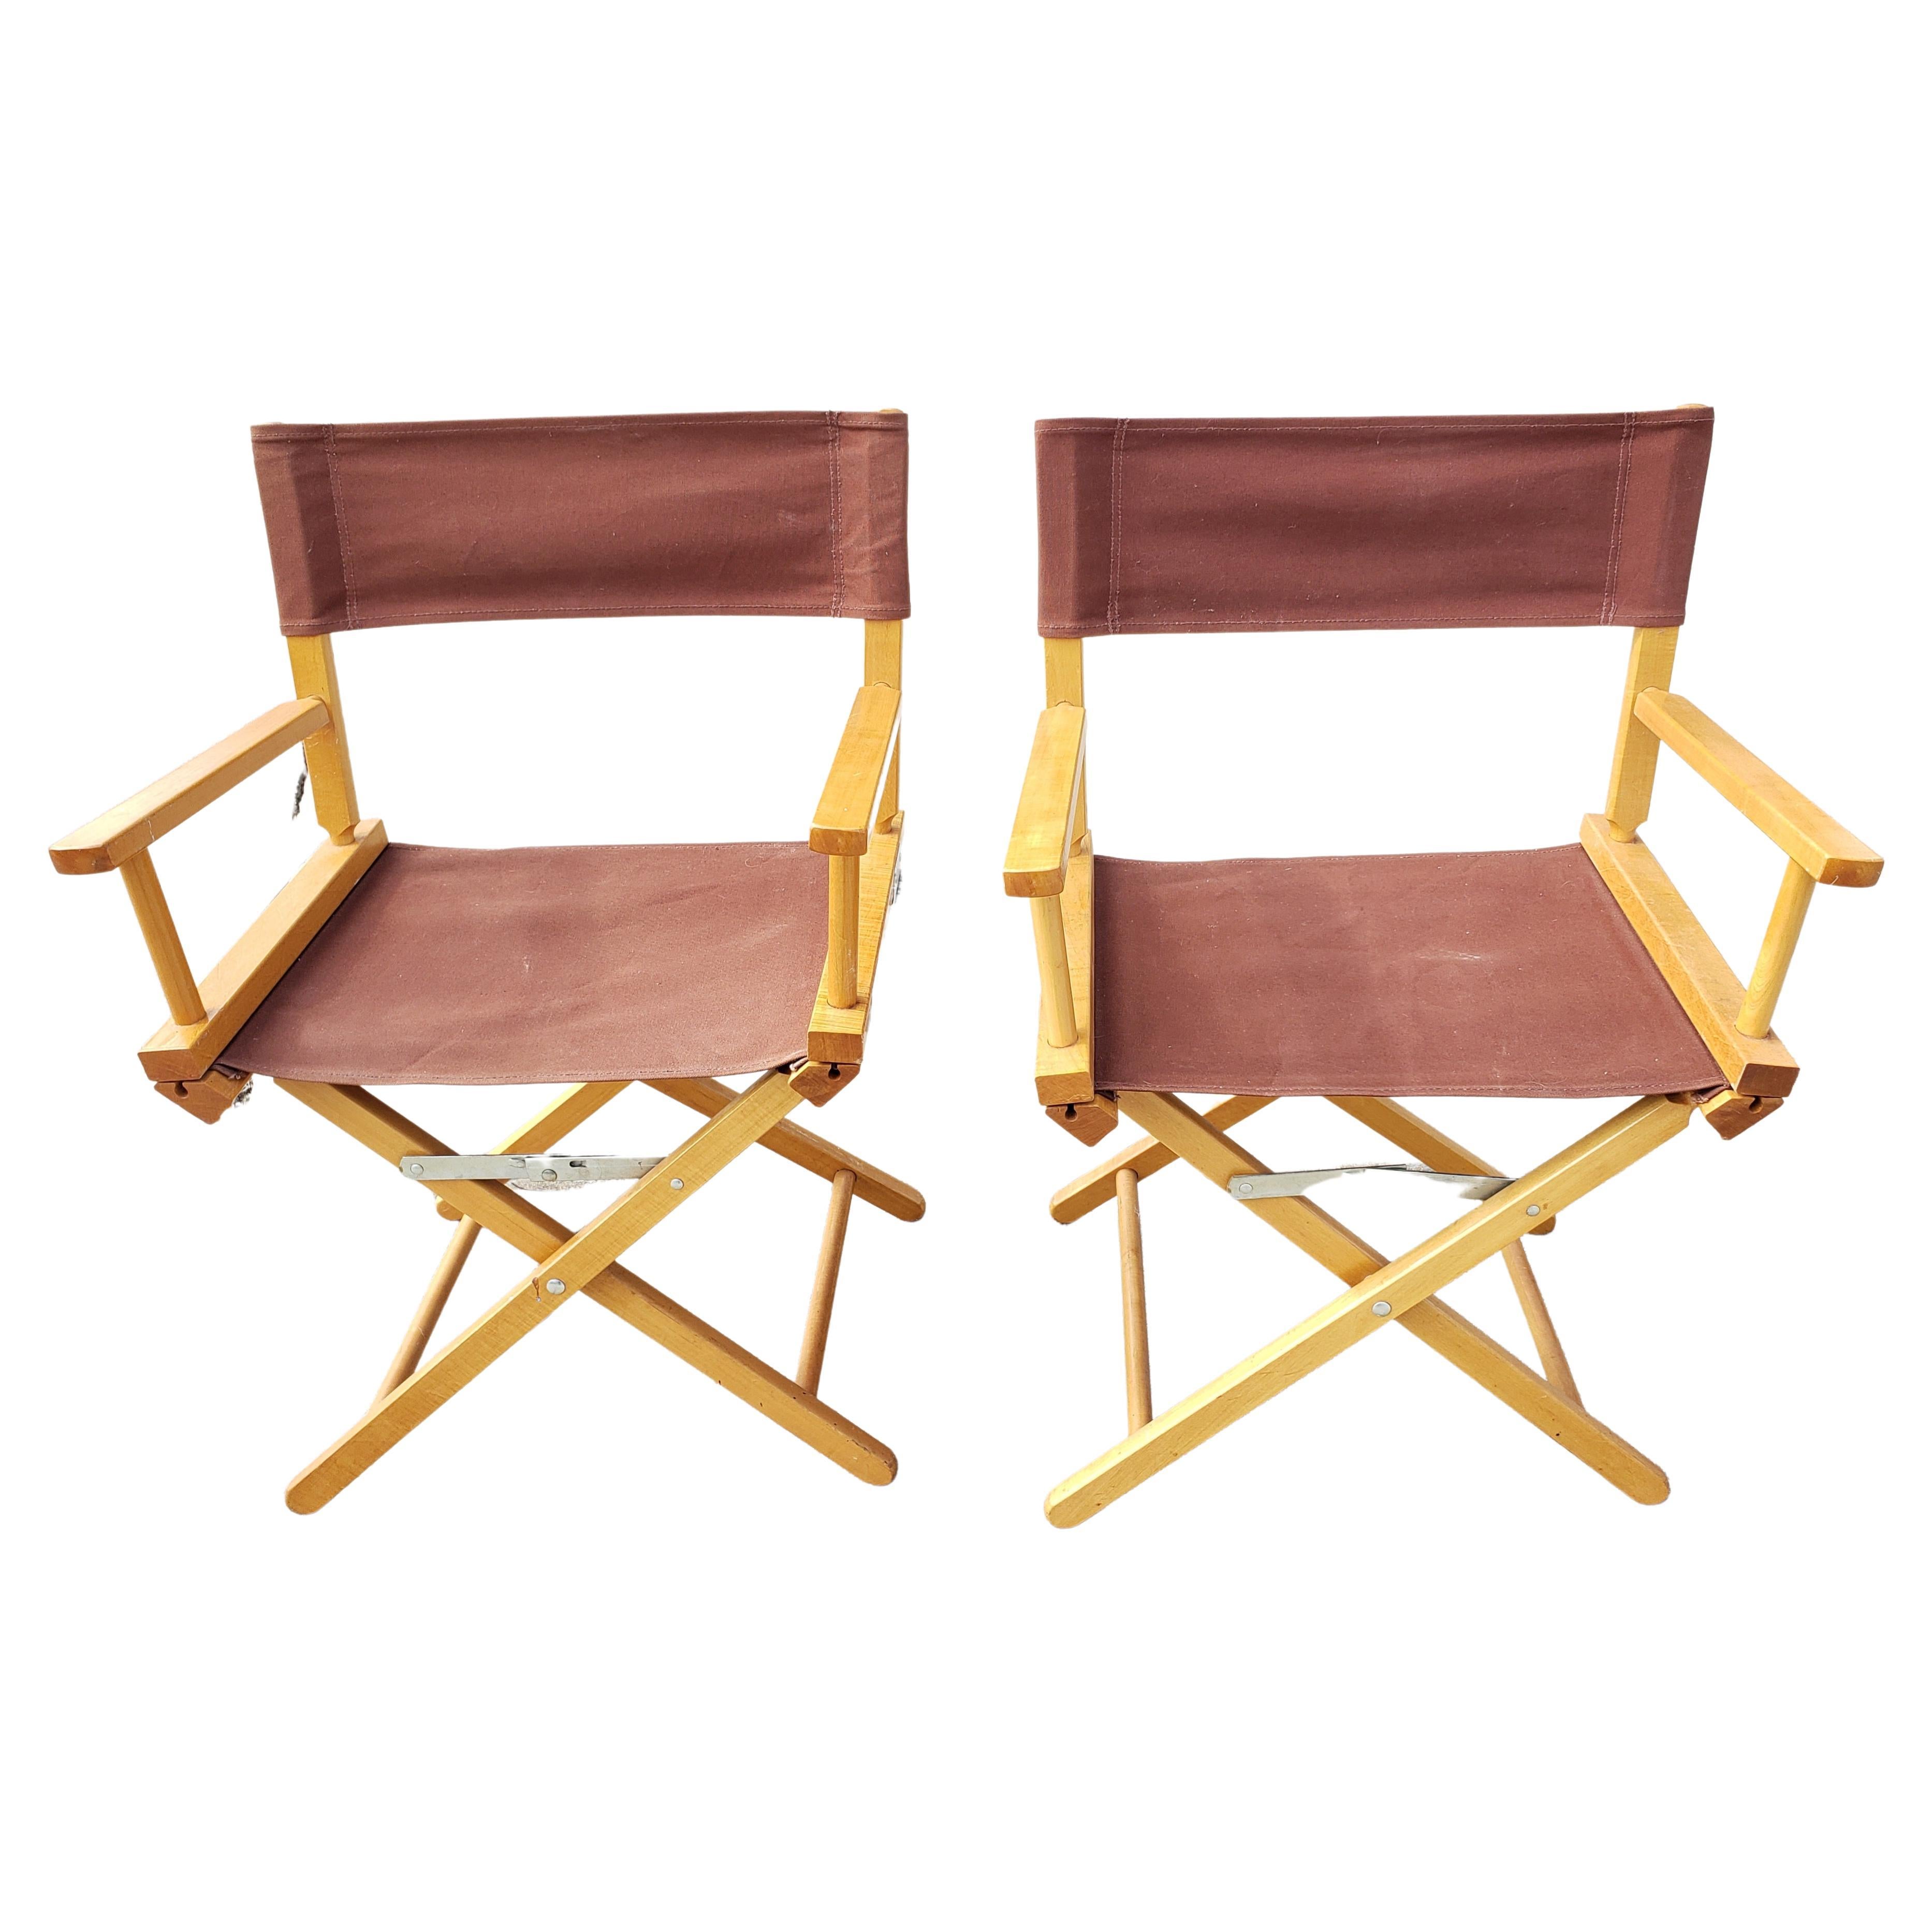 Vintage Solid Maple Directors Chairs with Brown Canvas Upholstery, a Pair